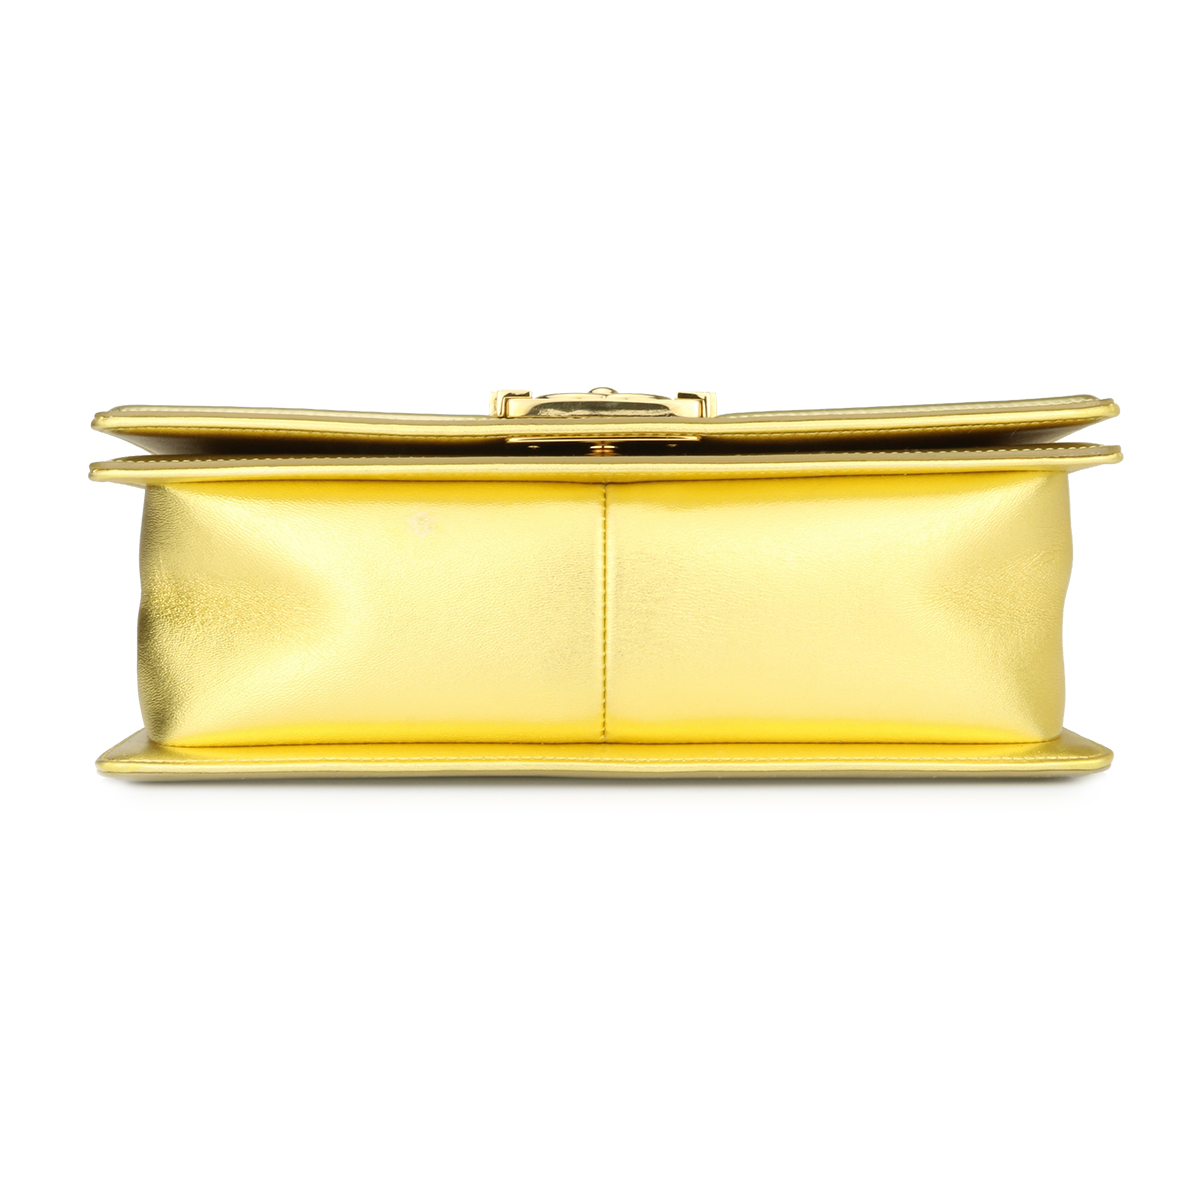 Chanel's N°5 Evening Bag Makes A Shiny Debut In Gold - BAGAHOLICBOY